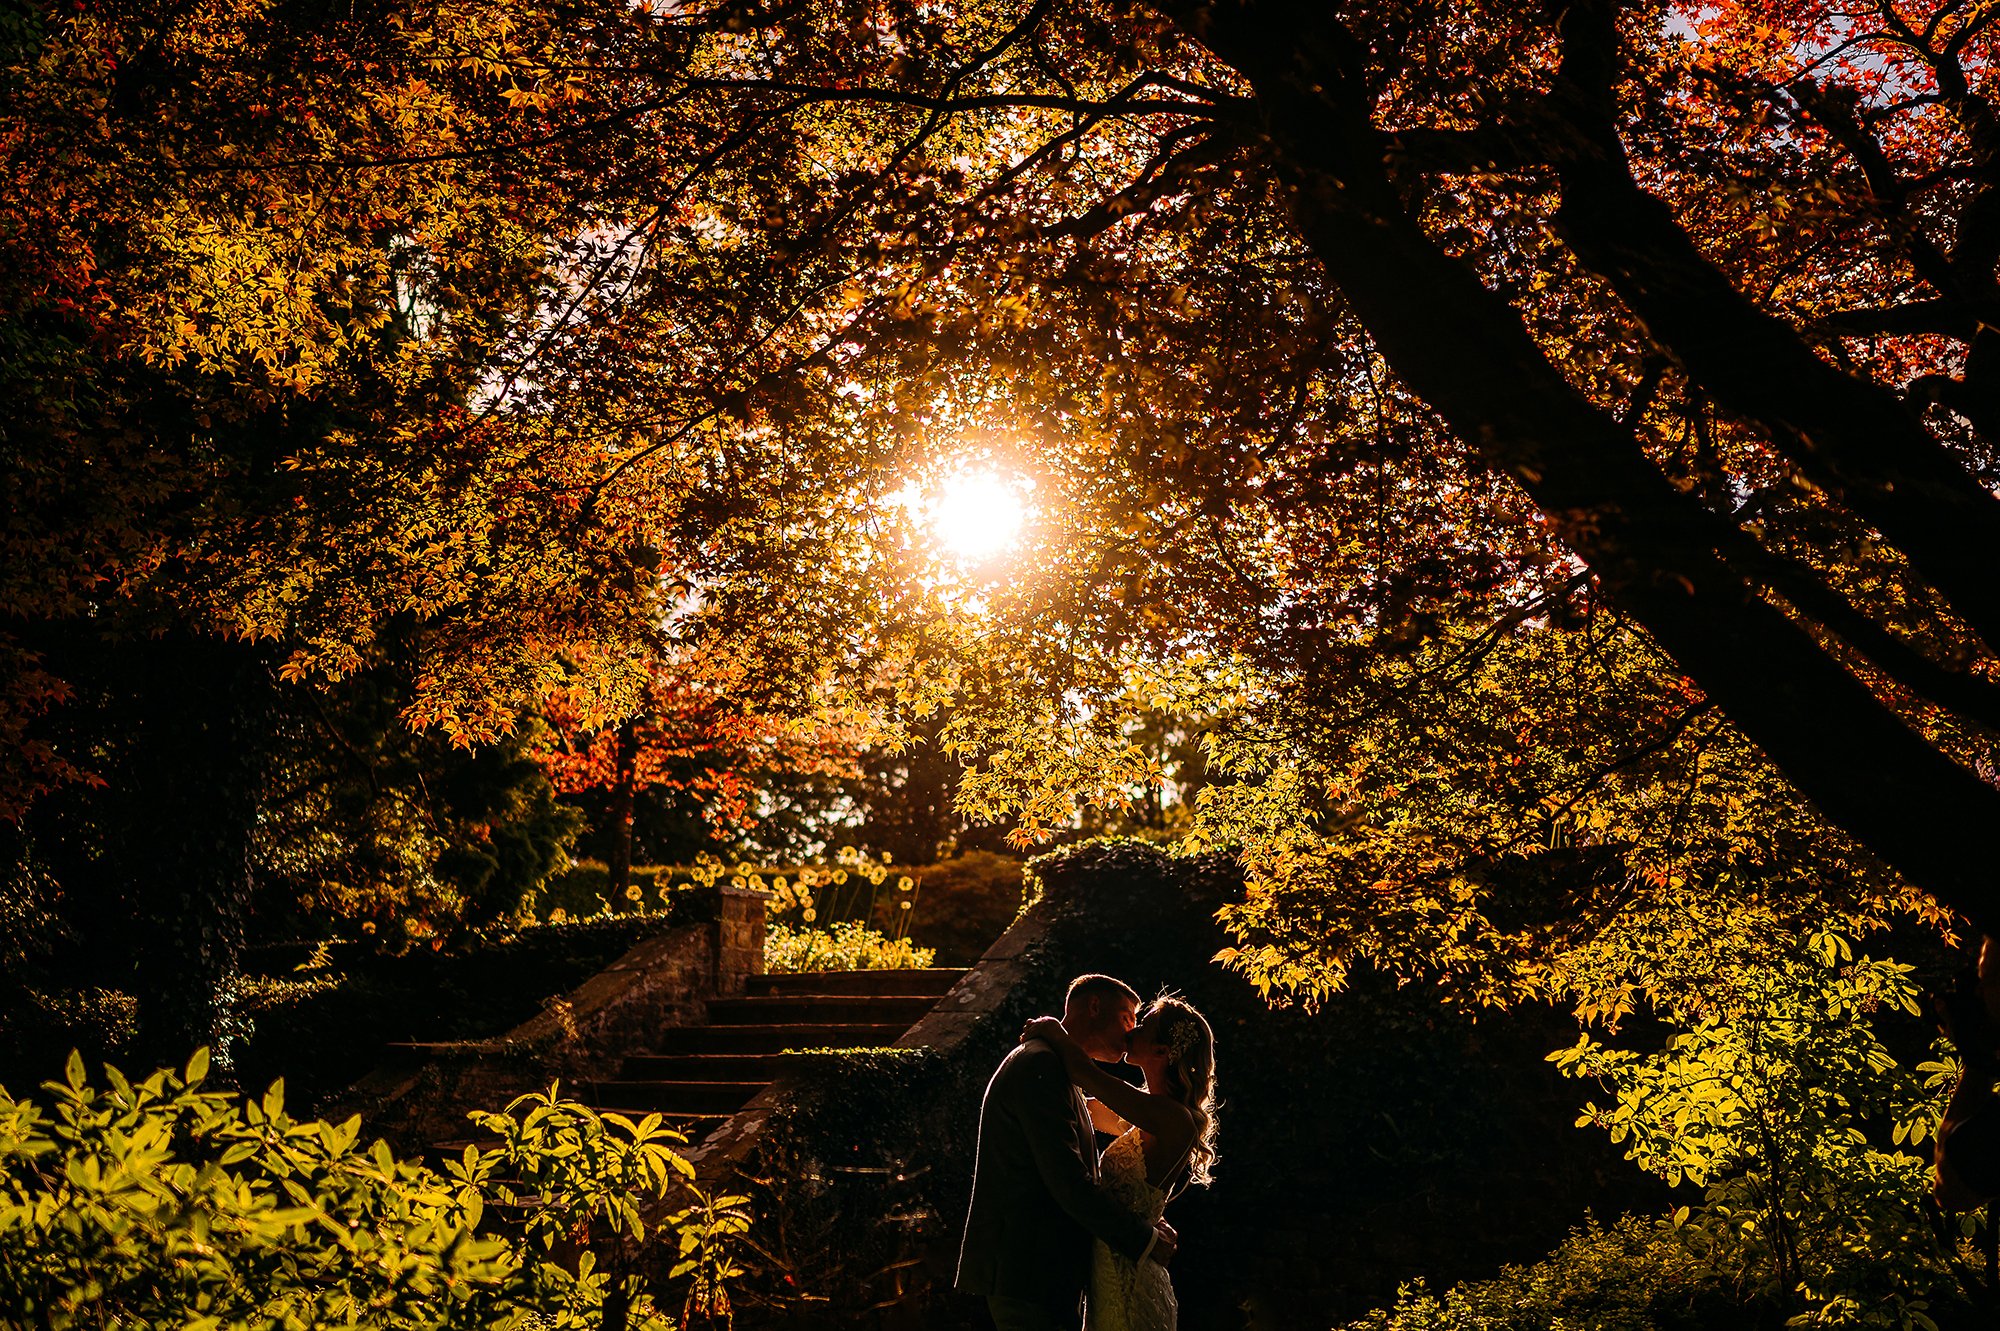  Golden hour cover portrait at Eaves hall under colourful leaves. 